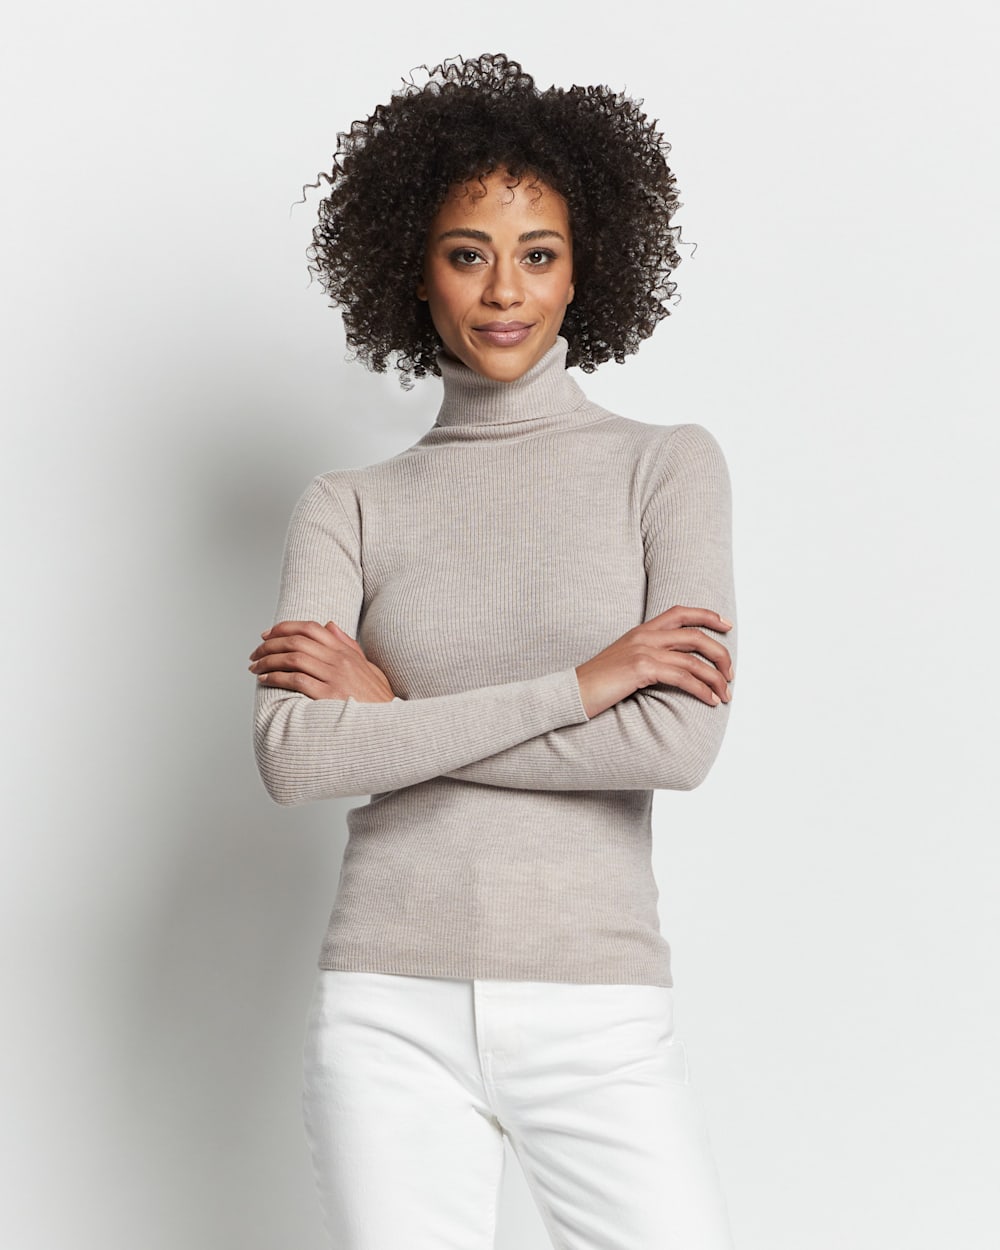 ALTERNATE VIEW OF WOMEN'S RIB MERINO TURTLENECK IN SOFT TAUPE HEATHER image number 3